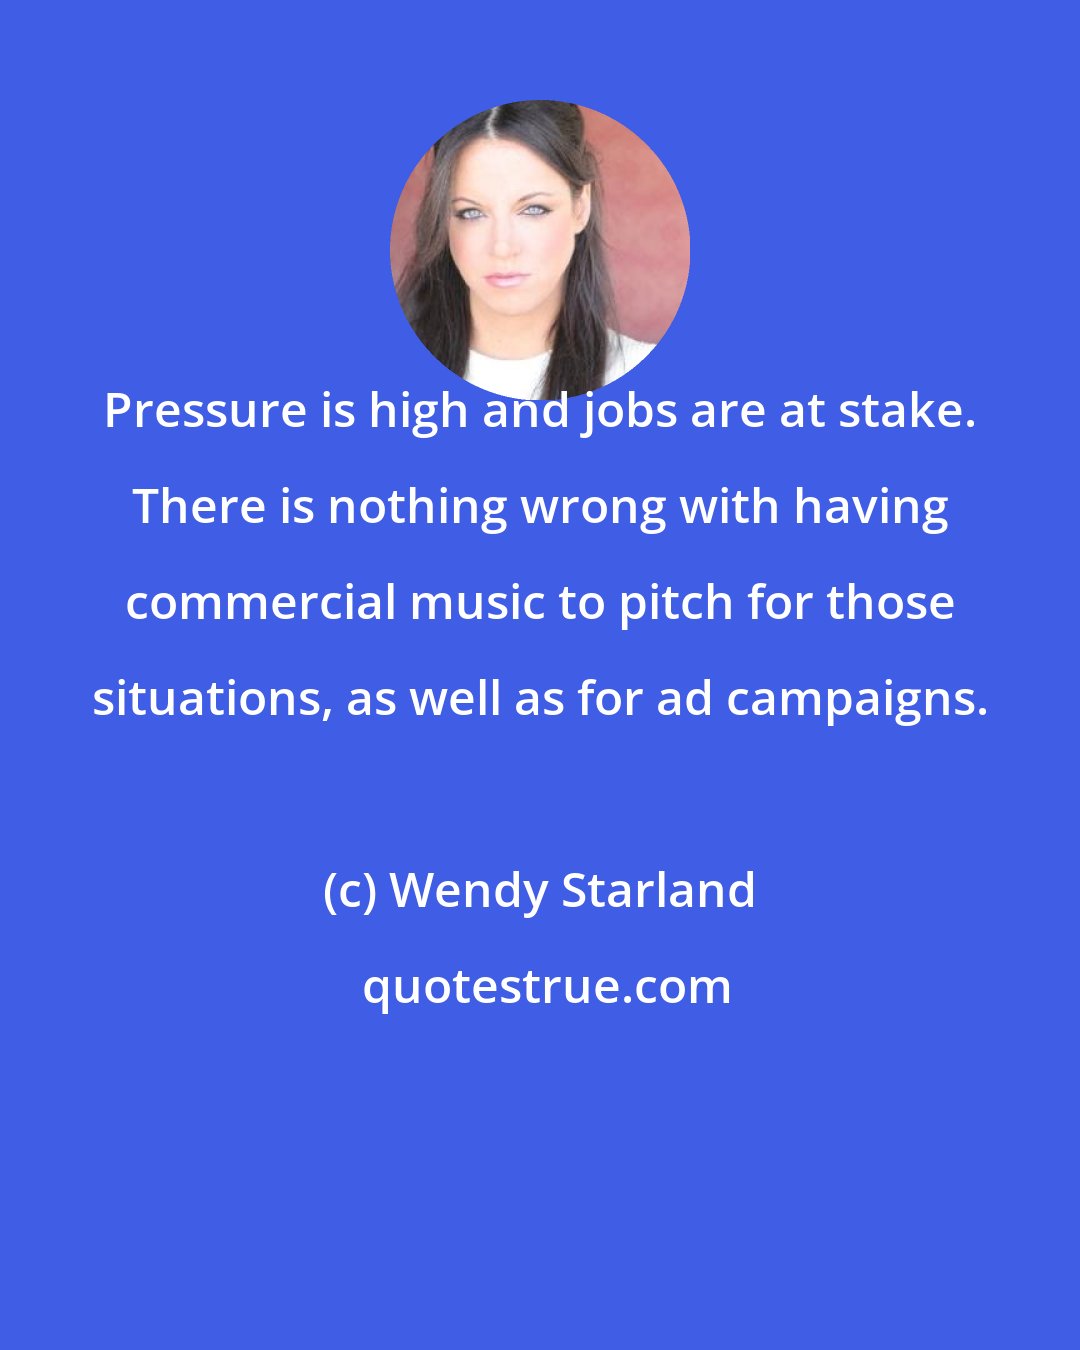 Wendy Starland: Pressure is high and jobs are at stake. There is nothing wrong with having commercial music to pitch for those situations, as well as for ad campaigns.